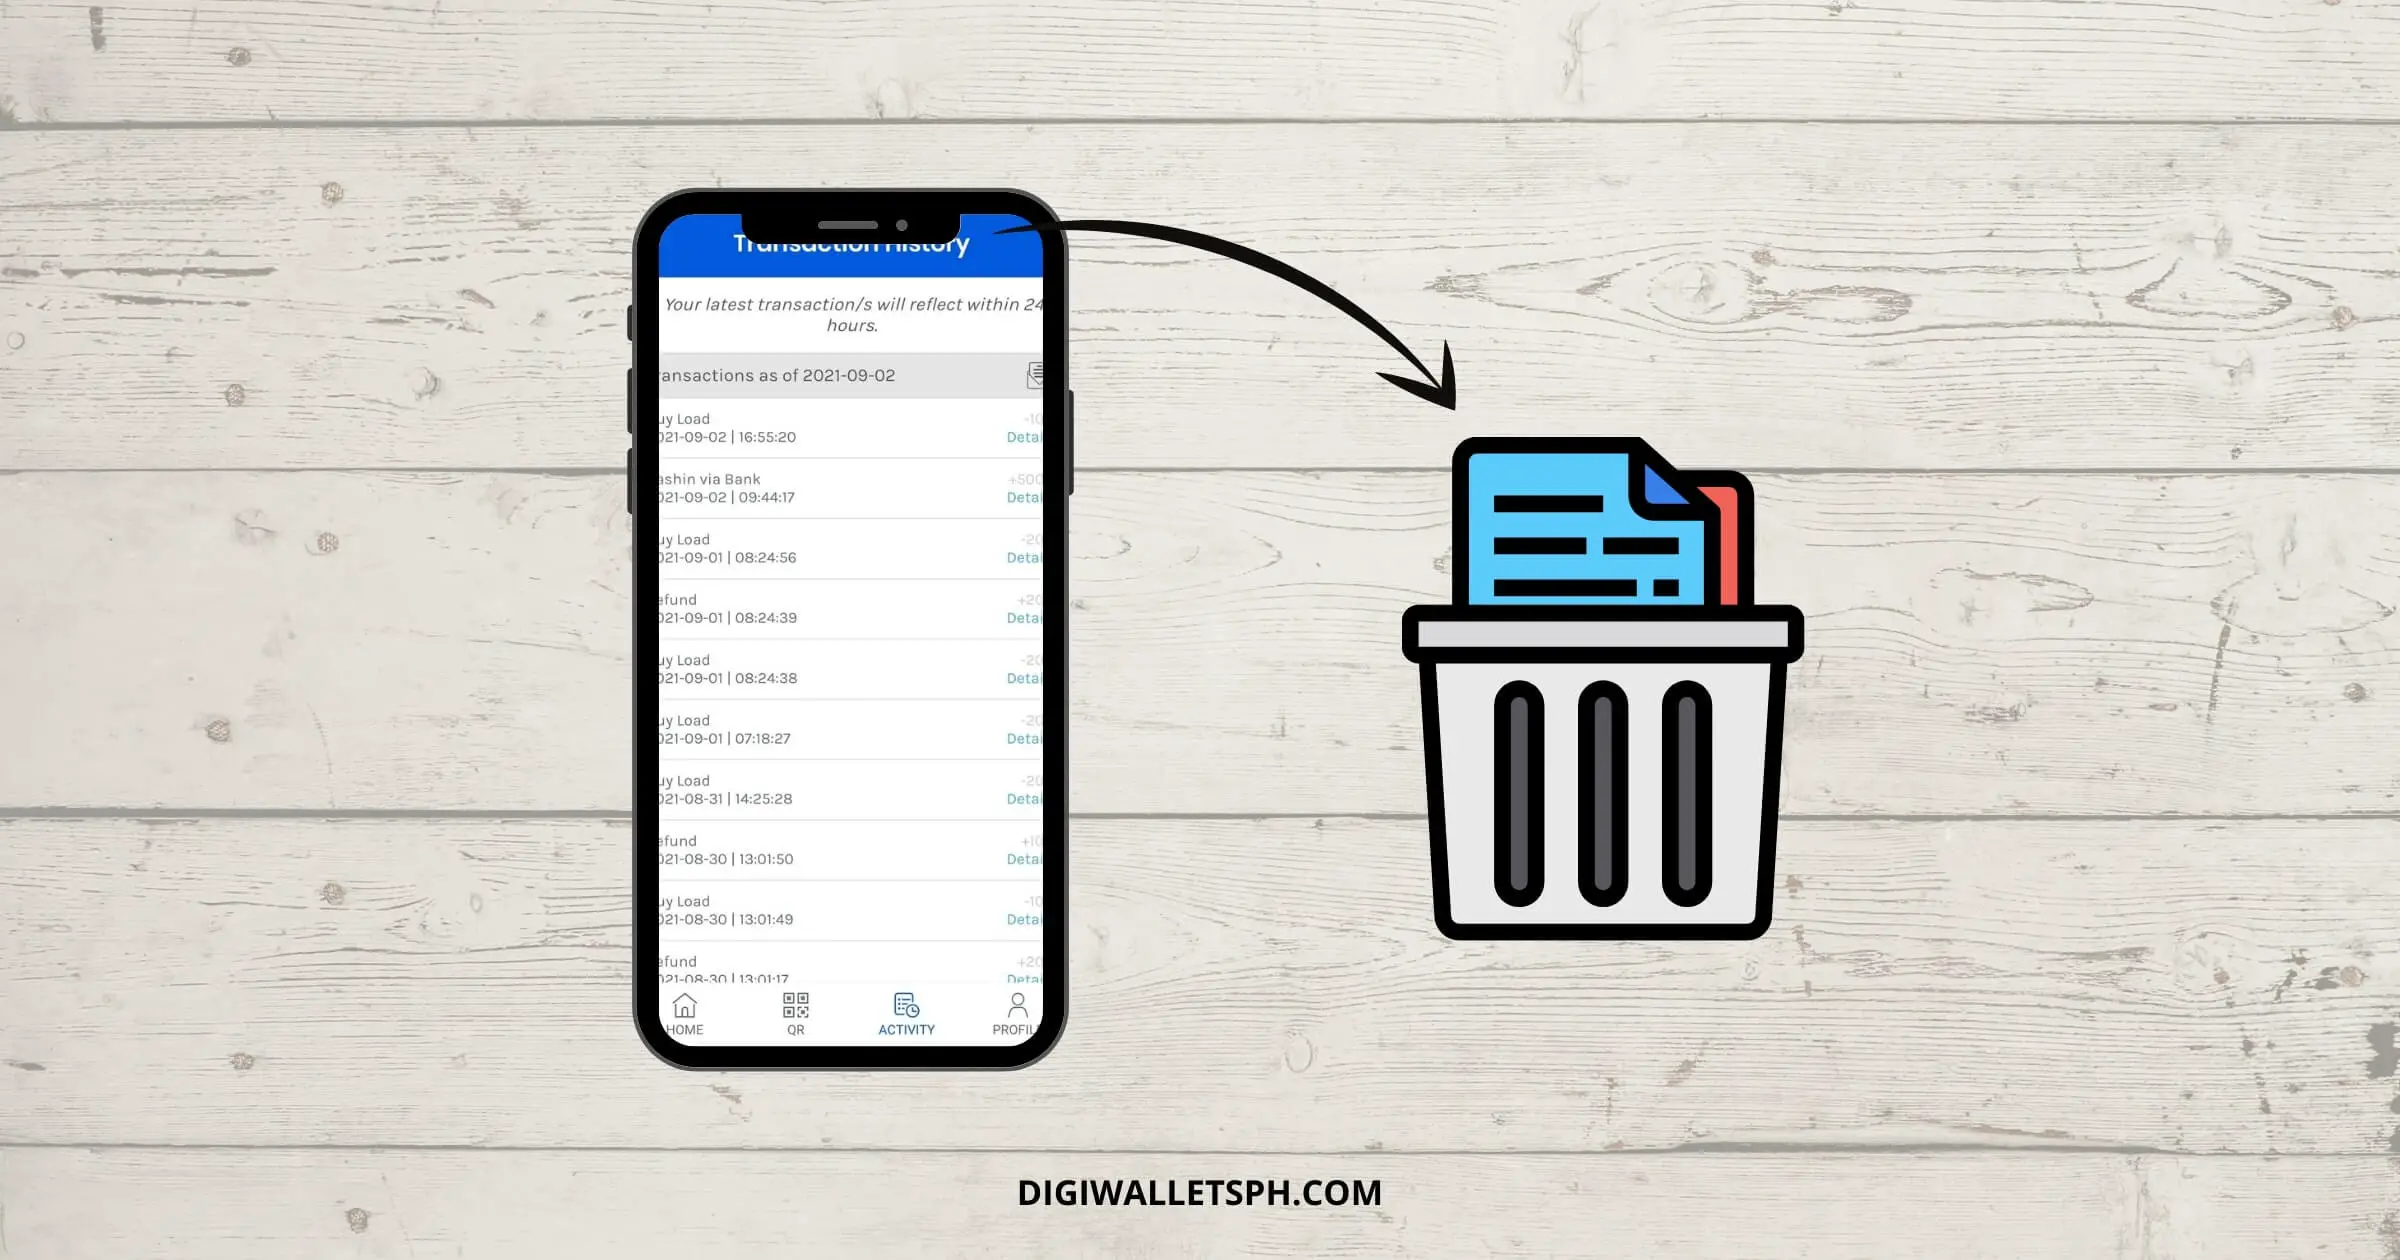 How to delete transaction history in GCash